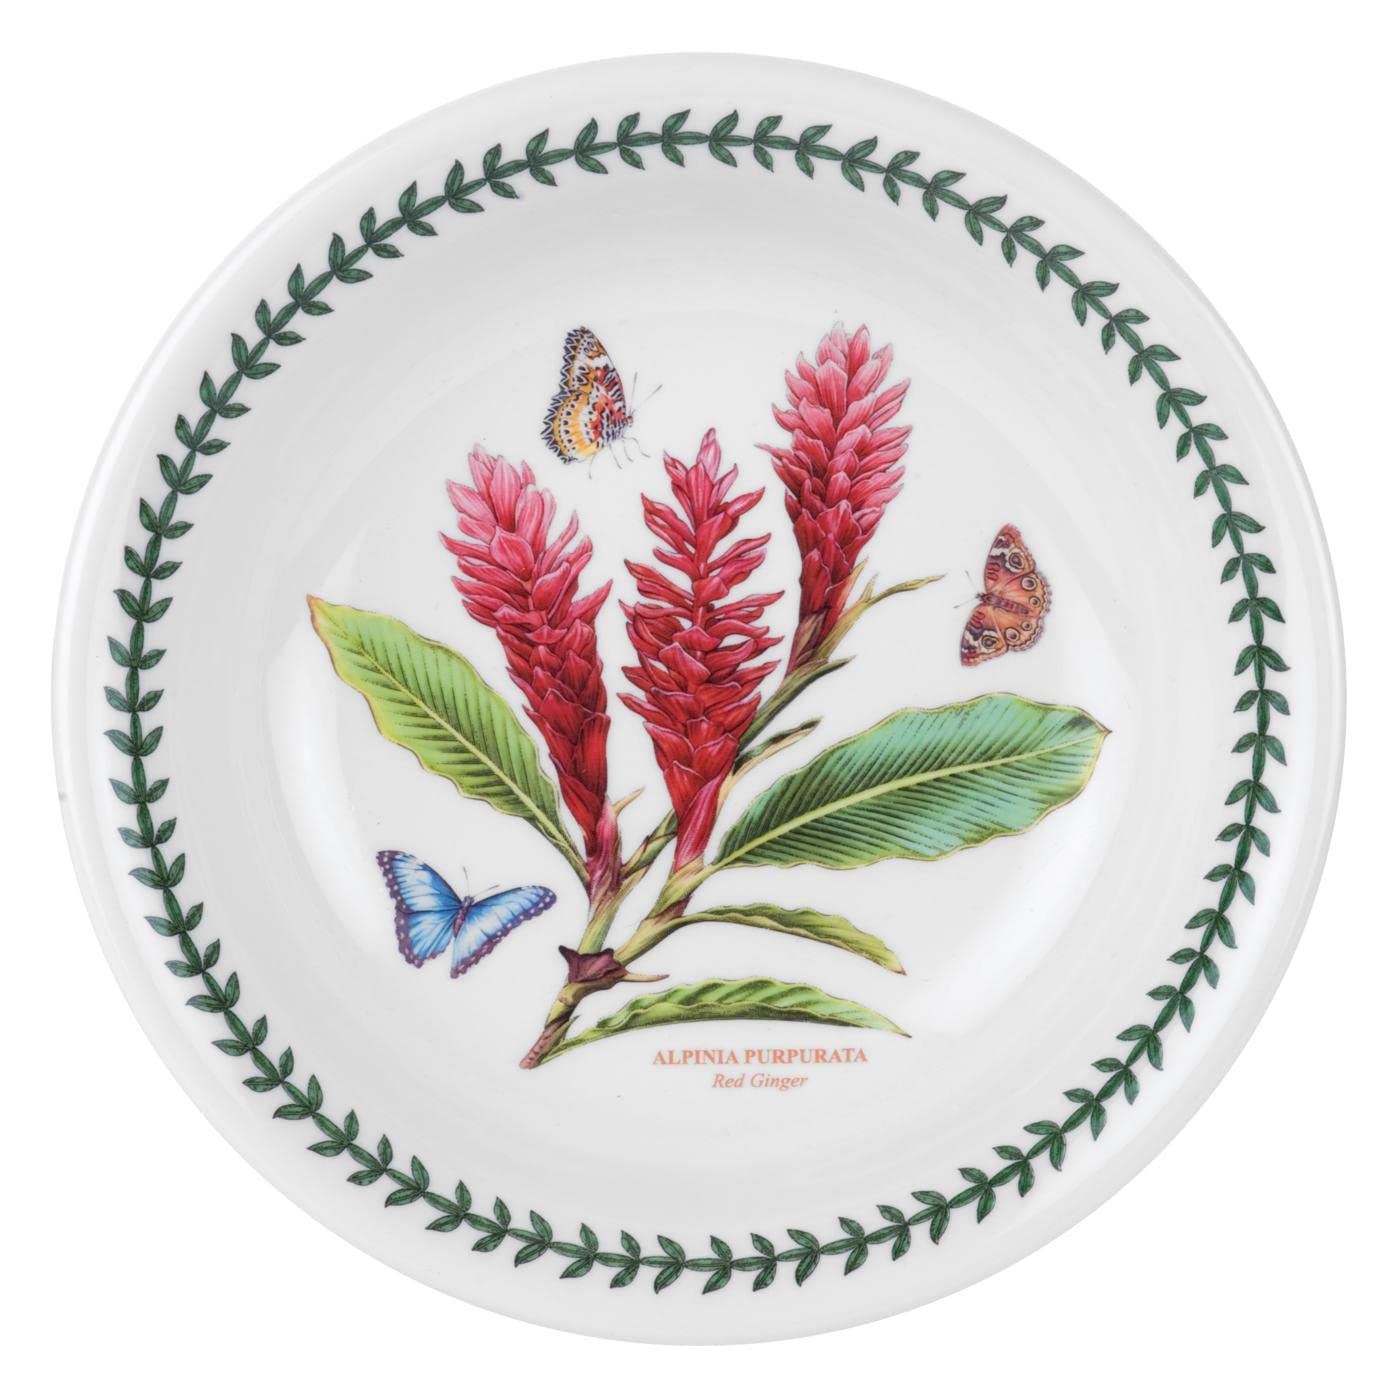 Portmeirion Exotic Botanic Garden 8.5 Inch Pasta Bowl with Red Ginger Motif | Dishwasher, Microwave, and Oven Safe | For Pasta, Soups, and Salads | Made in England